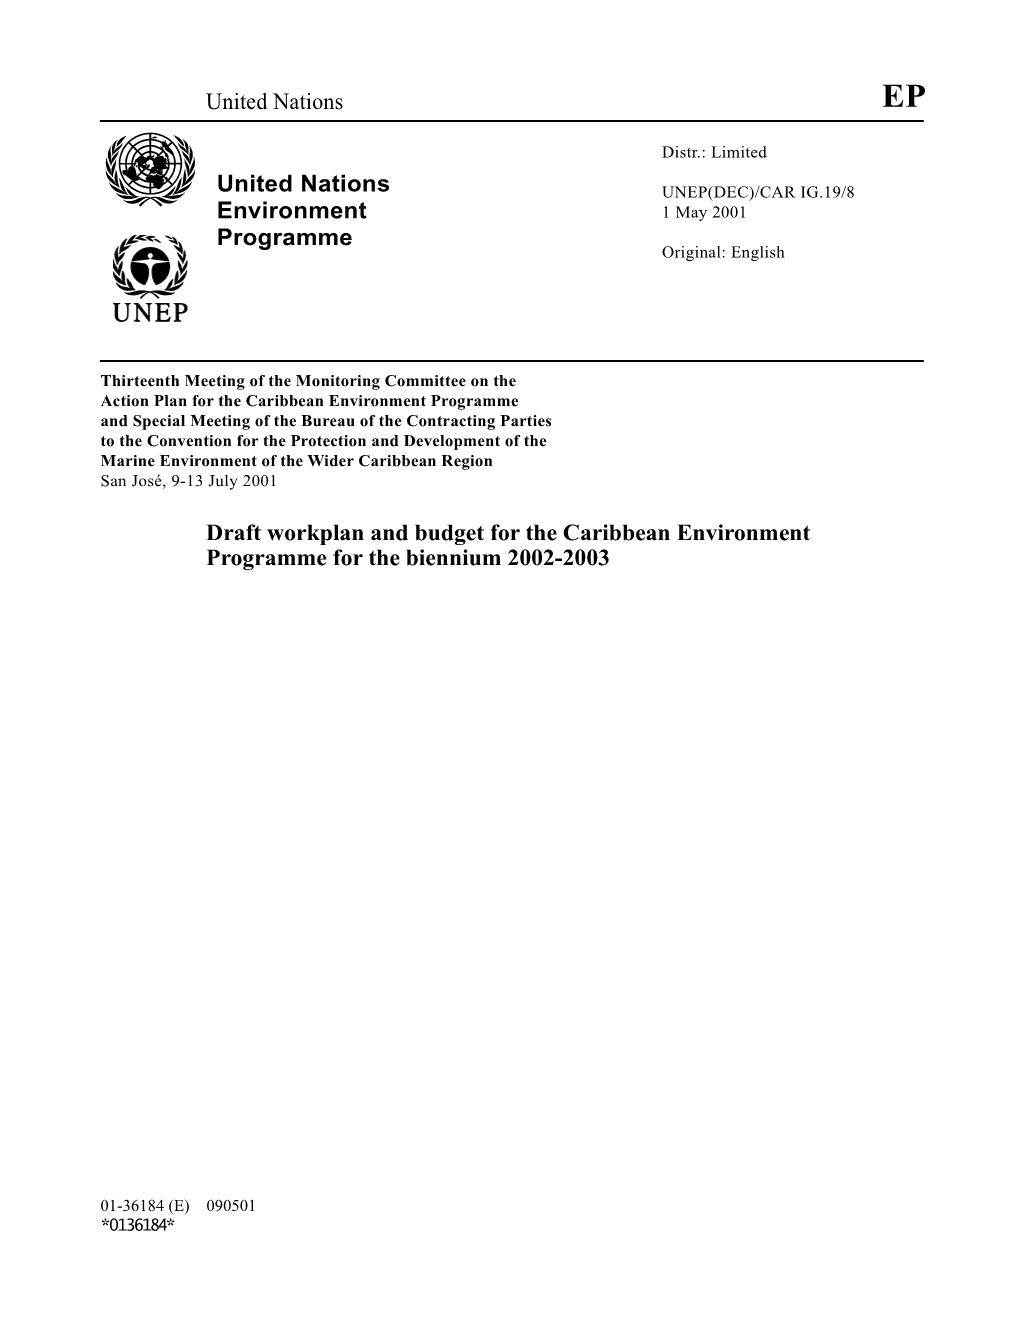 Draft Workplan and Budget for the Caribbean Environment Programme for the Biennium 2002-2003